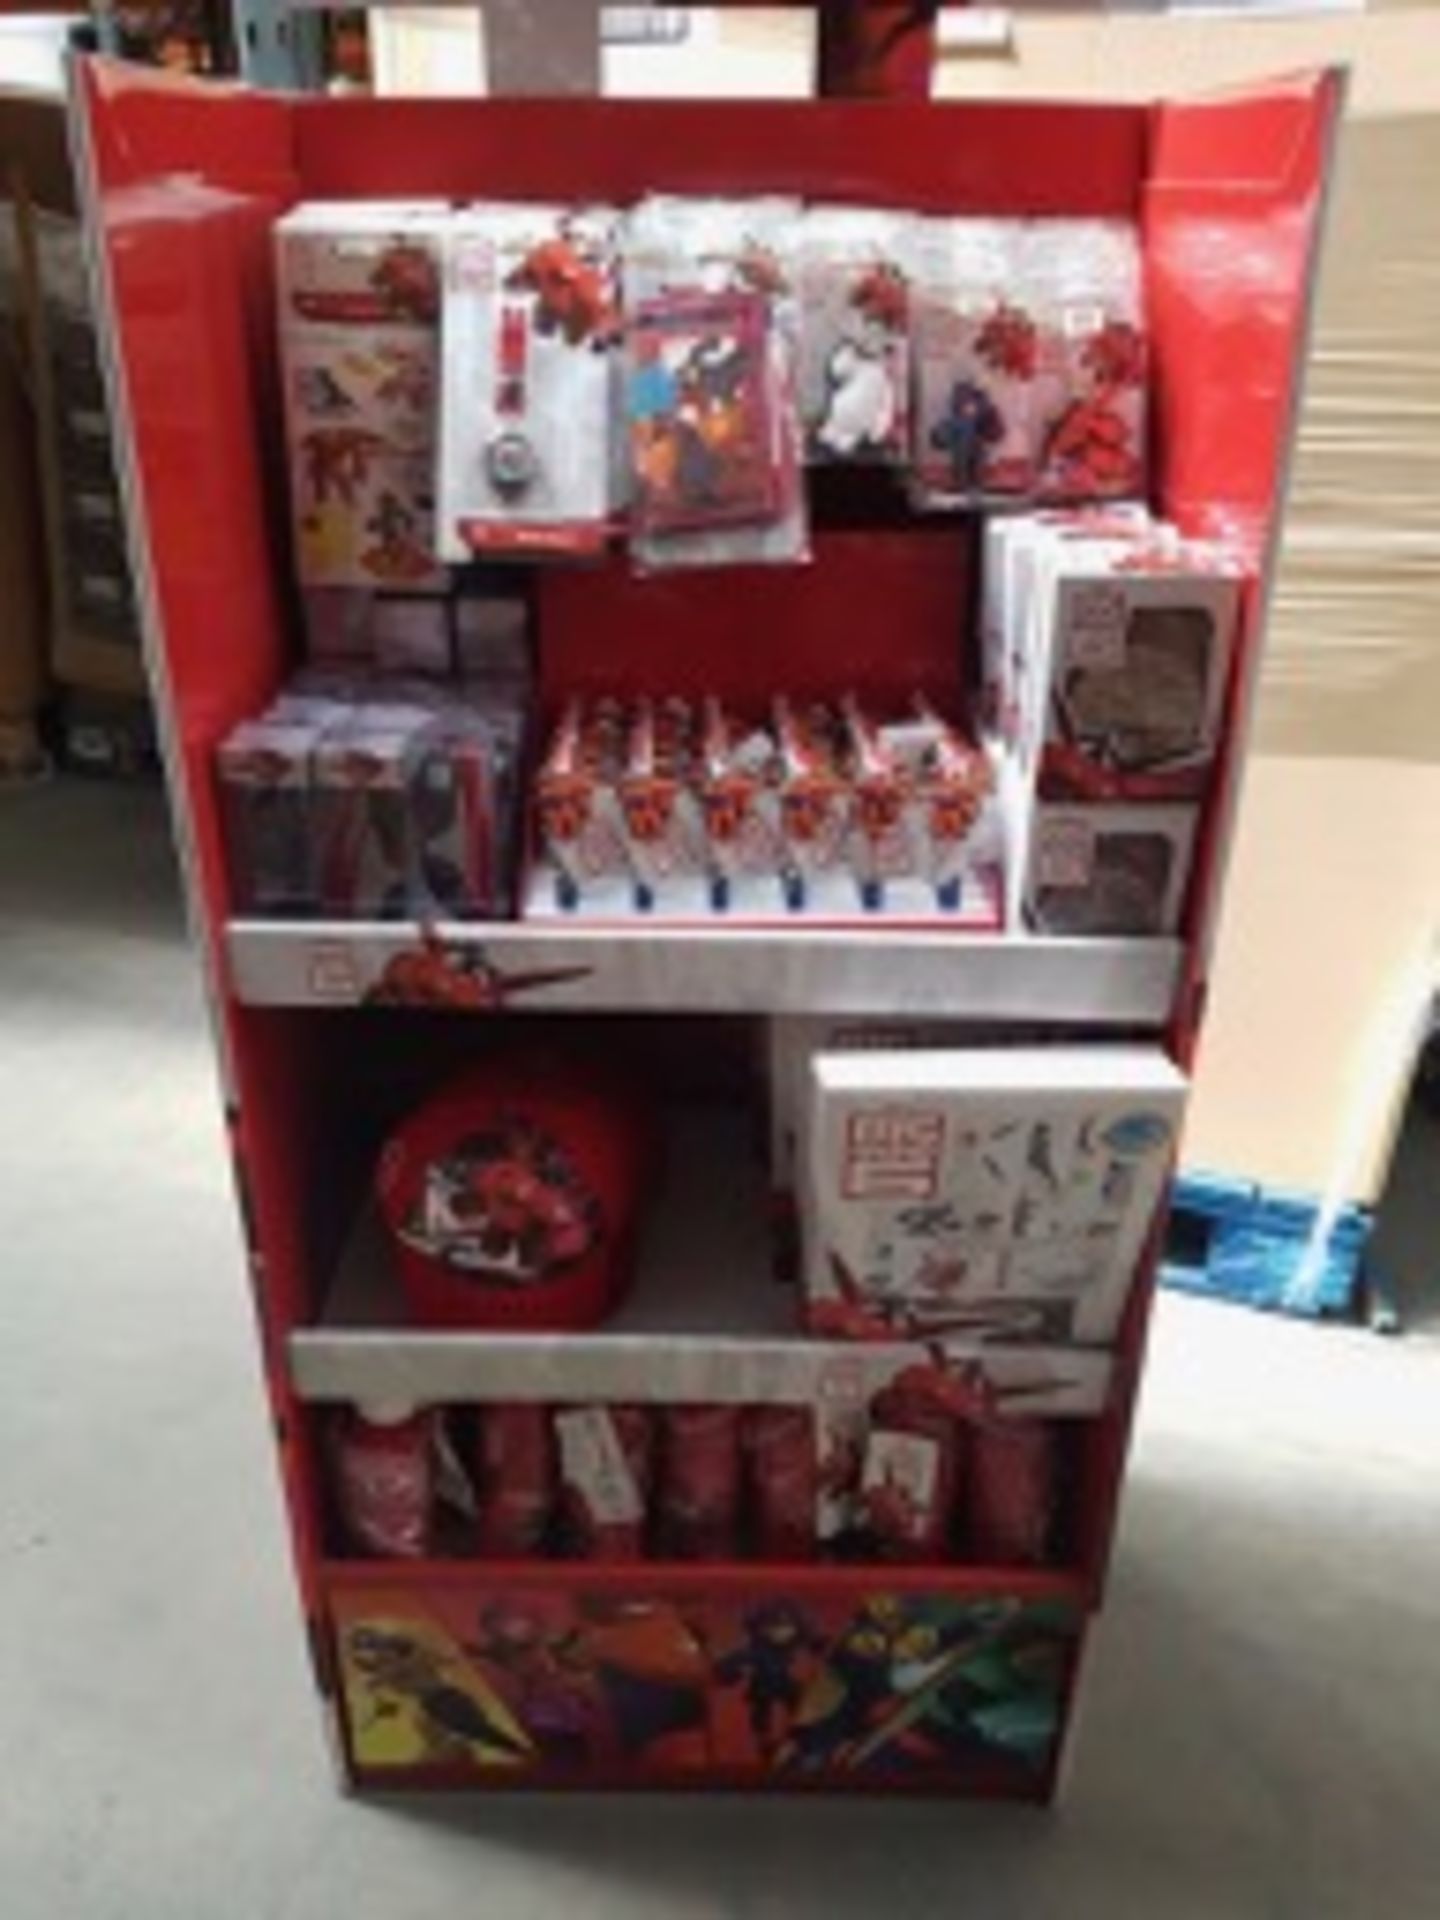 1 x Brand New Big Hero 6 - 328 piece Full Shop Display Unit. Contains: 36 Sticker Sets, 16 - Image 2 of 7